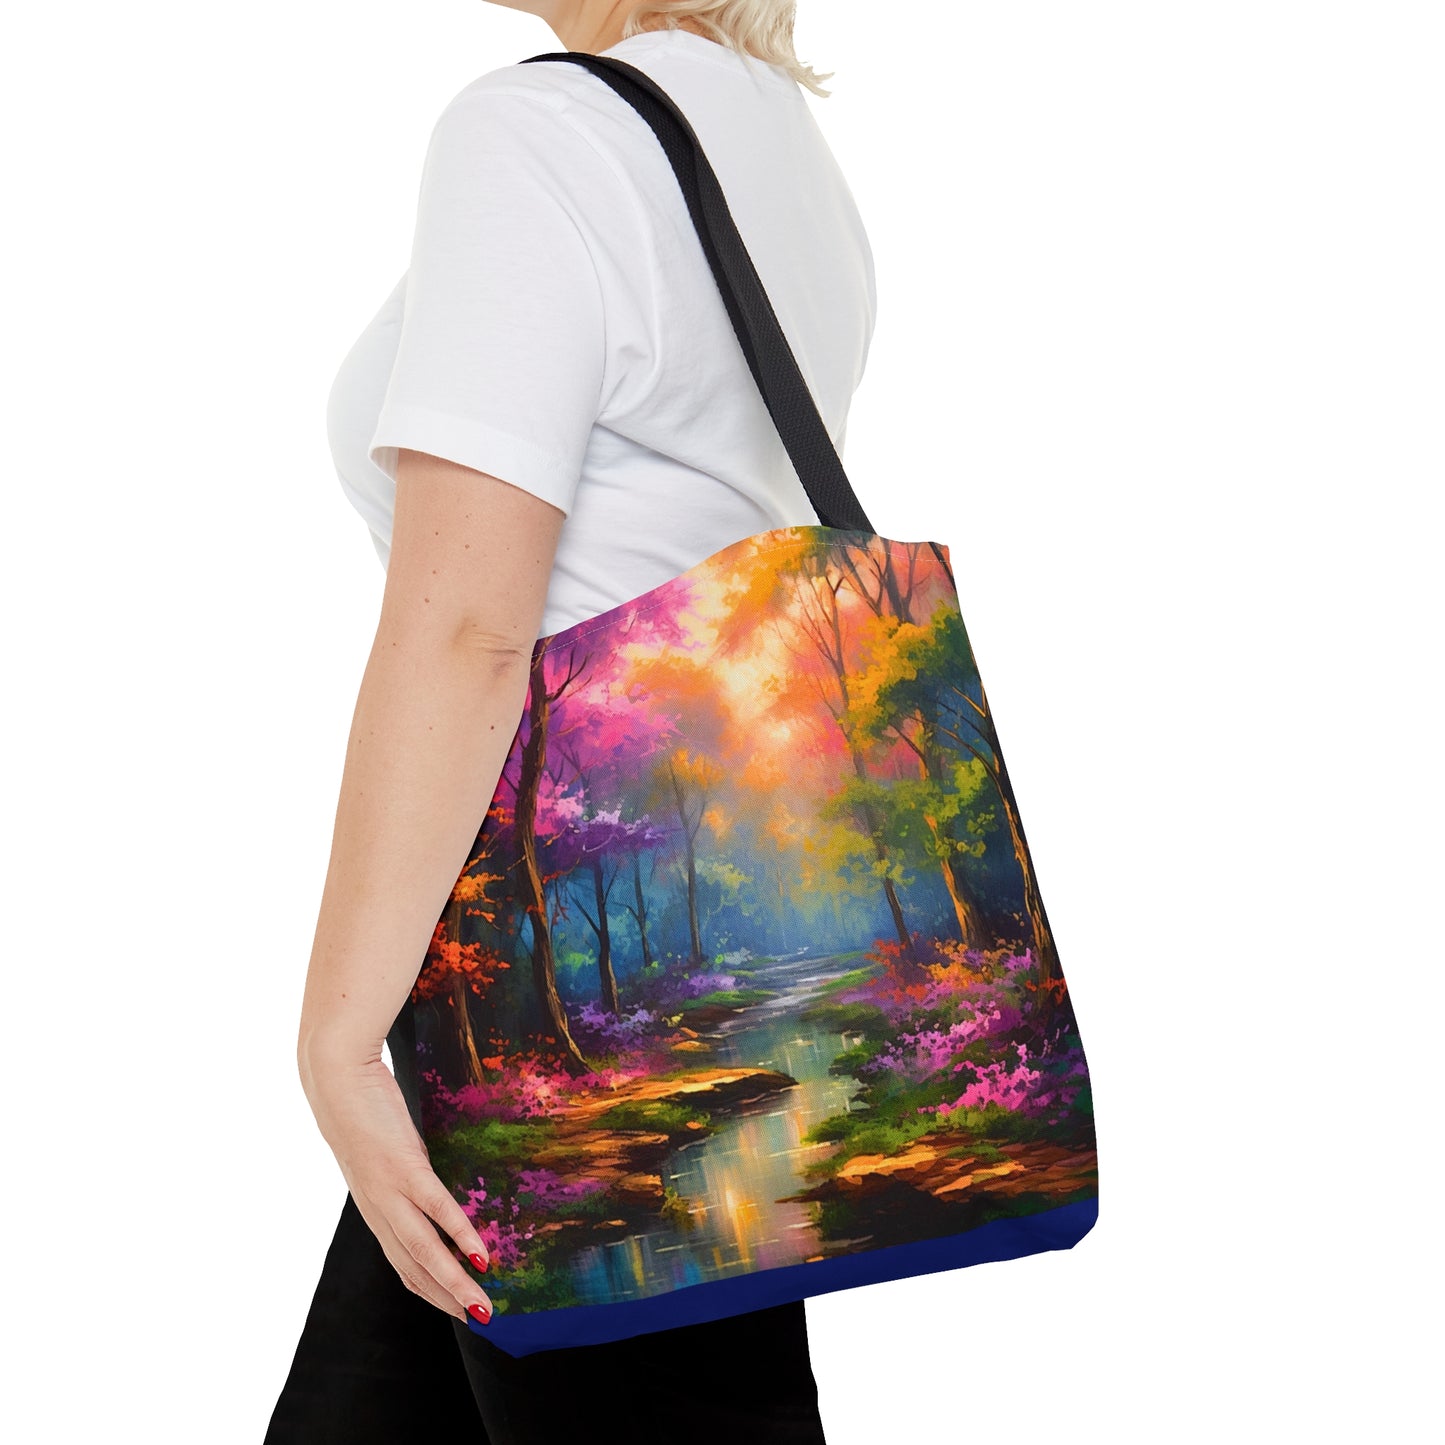 Tote Bag - Enchanted Forest 1